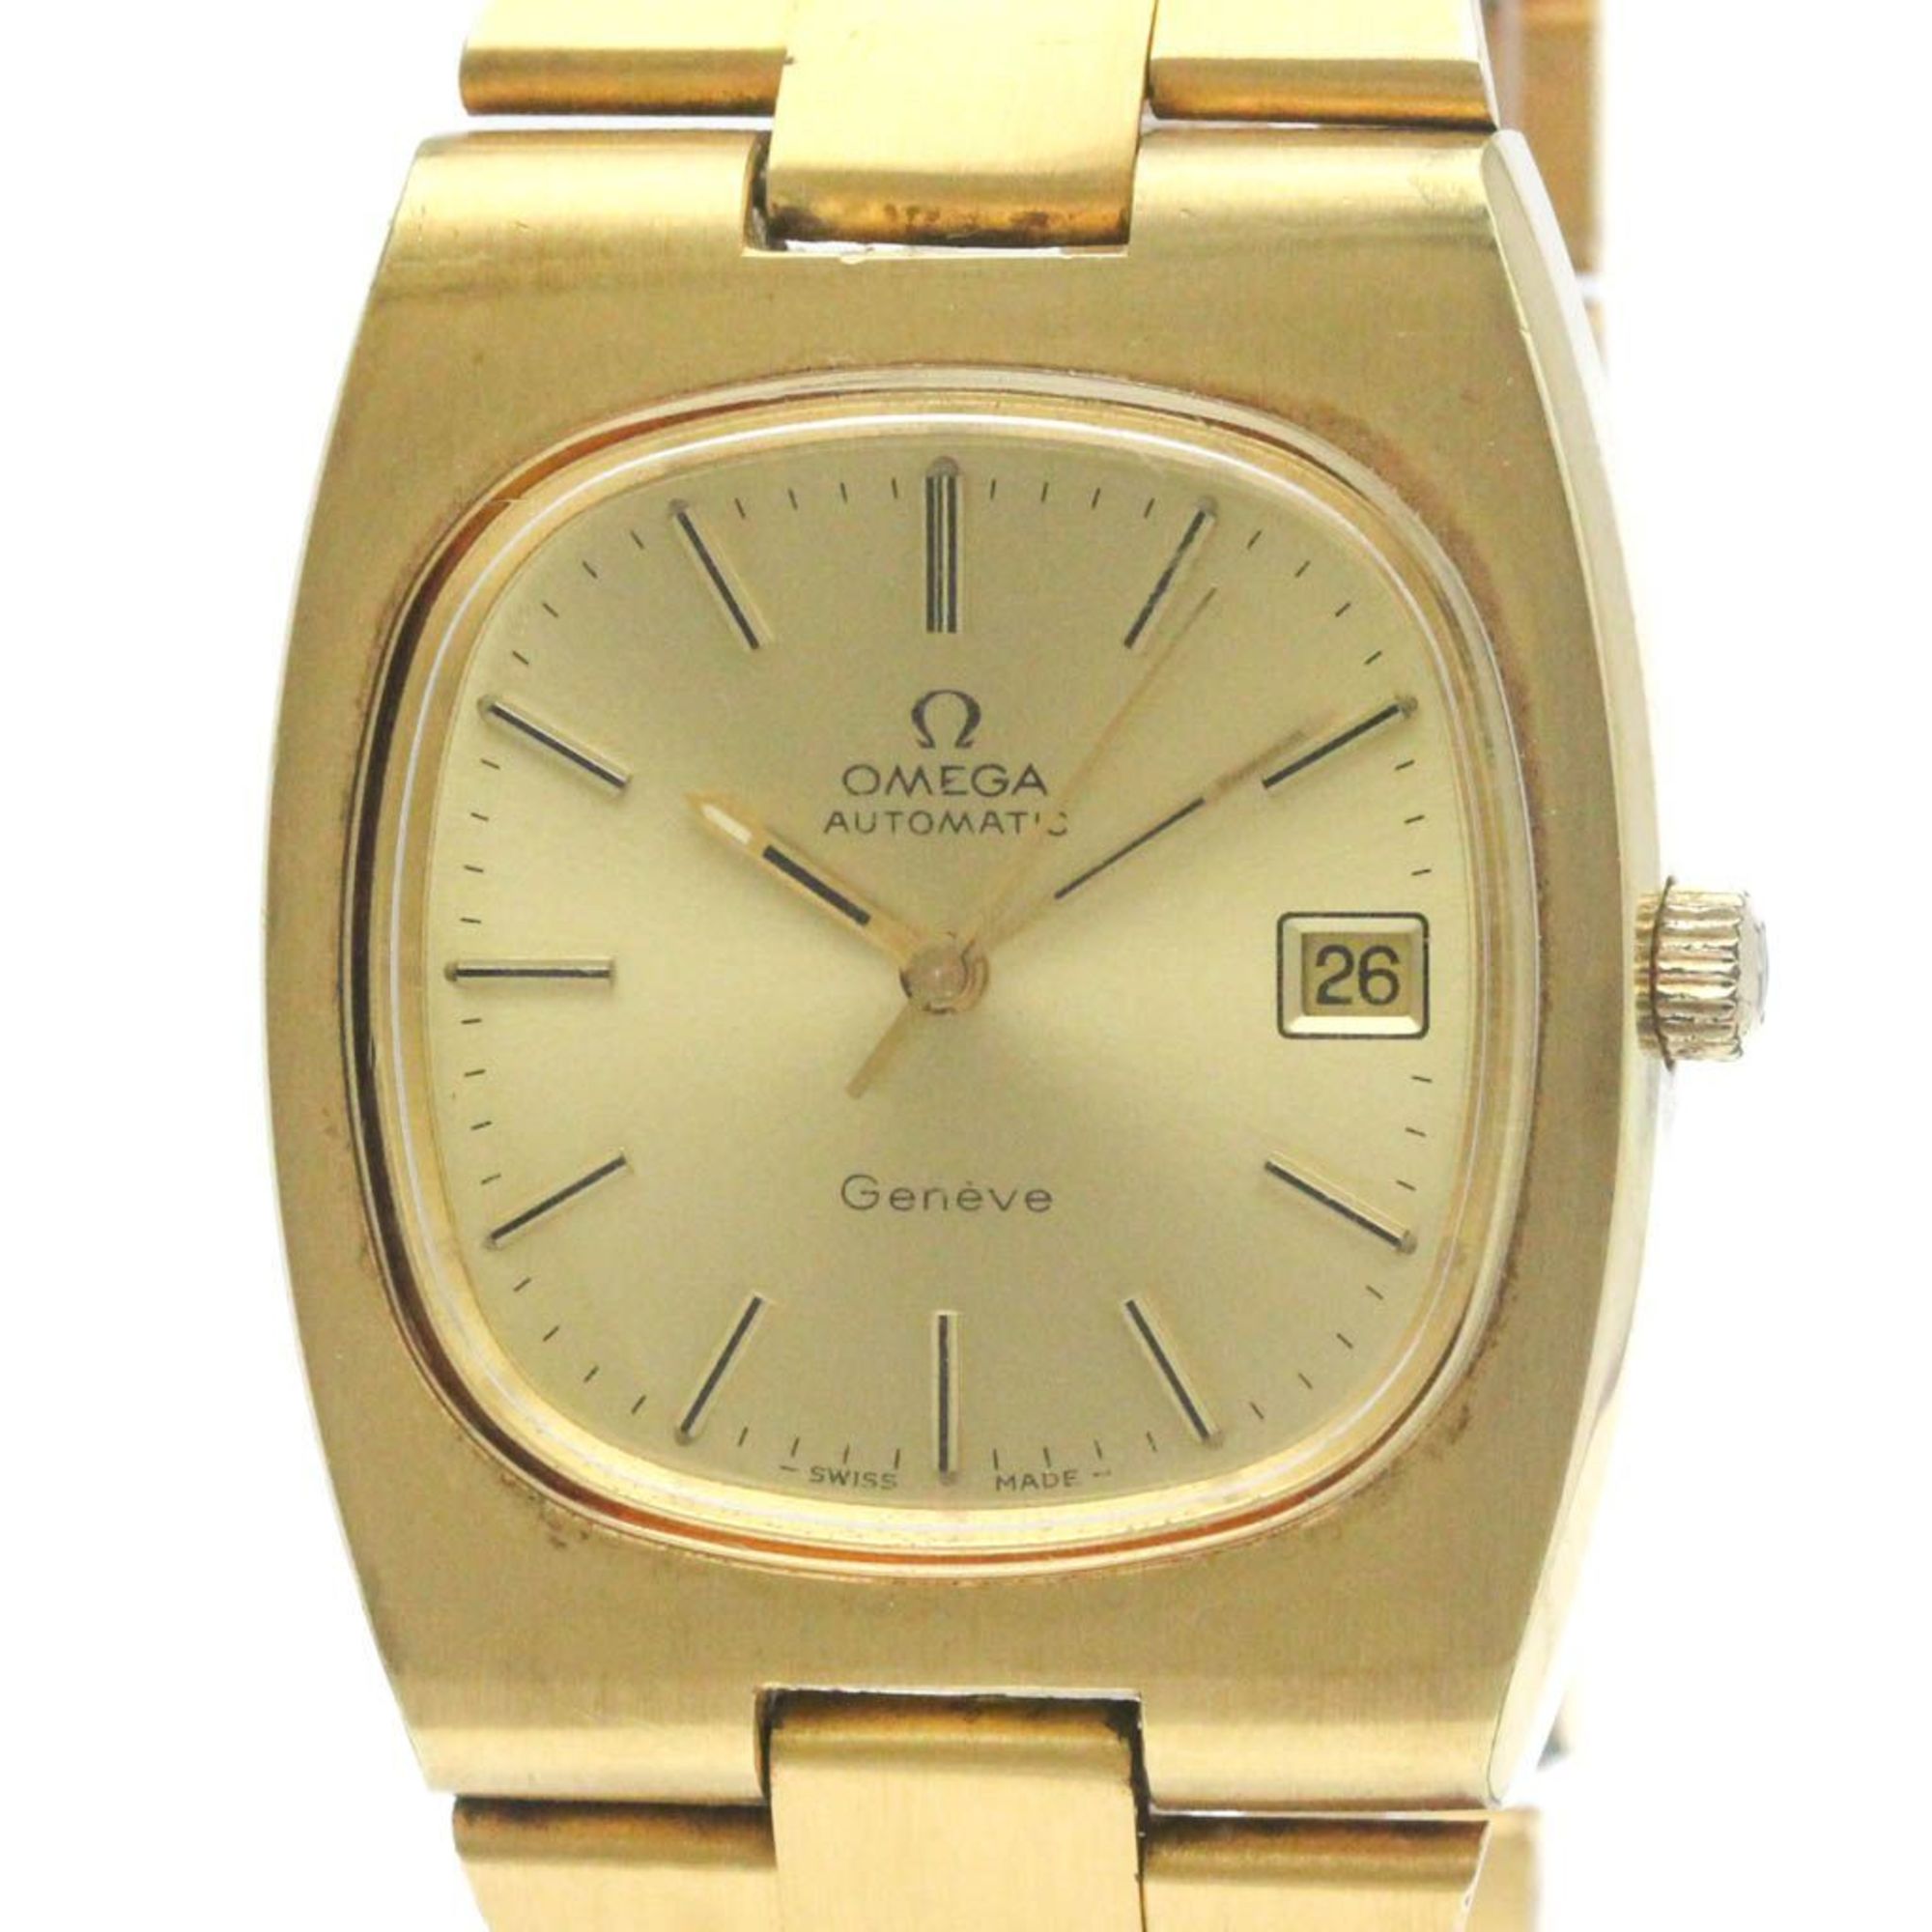 Vintage OMEGA Geneve Cal 1012 Automatic Gold Plated Watch 166.0191 BF568299